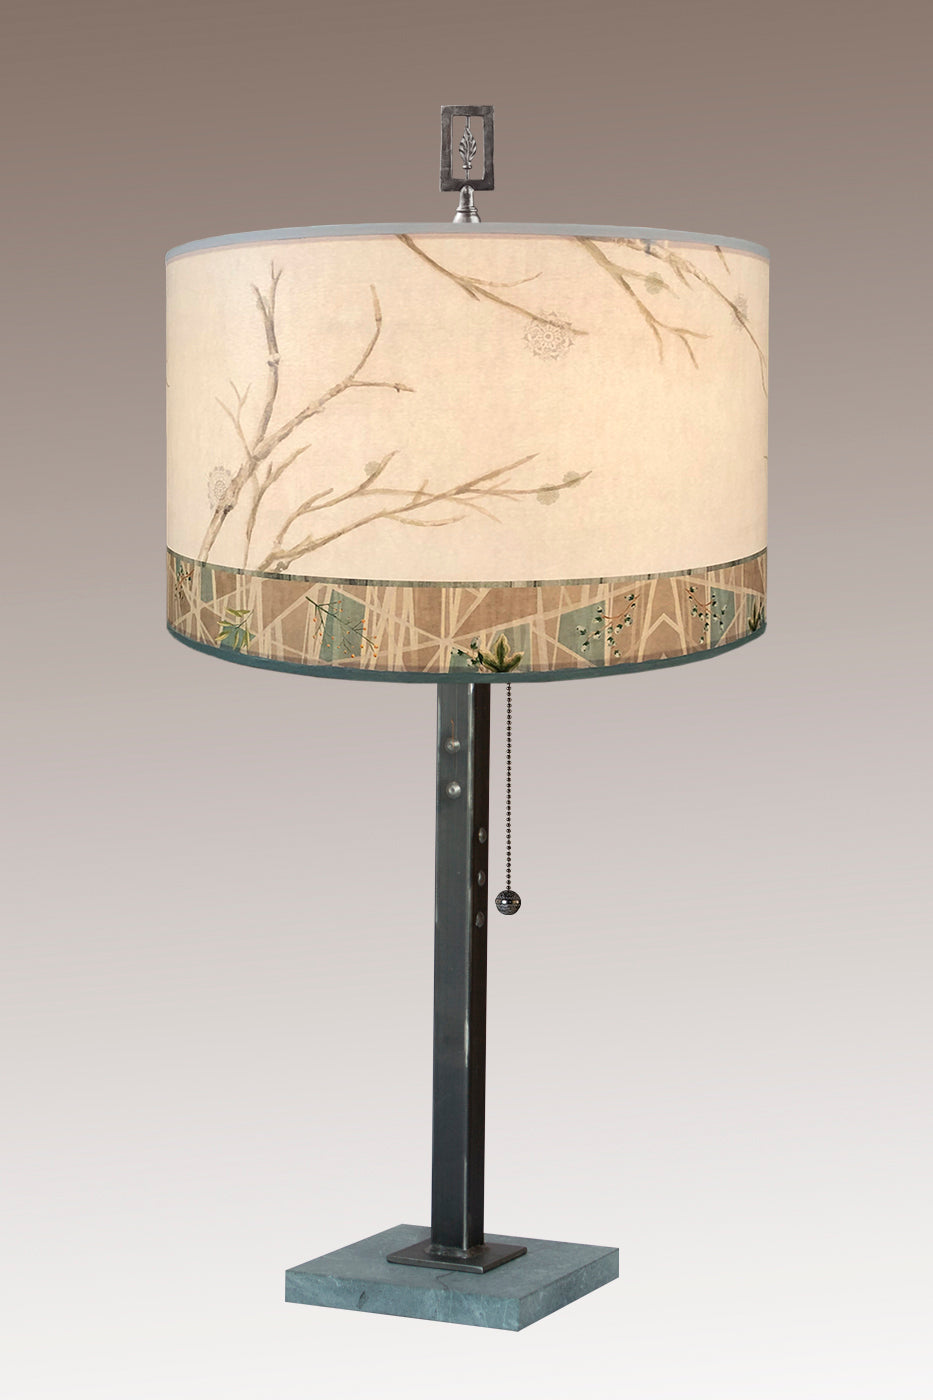 Steel Table Lamp with Large Drum Shade in Prism Branch